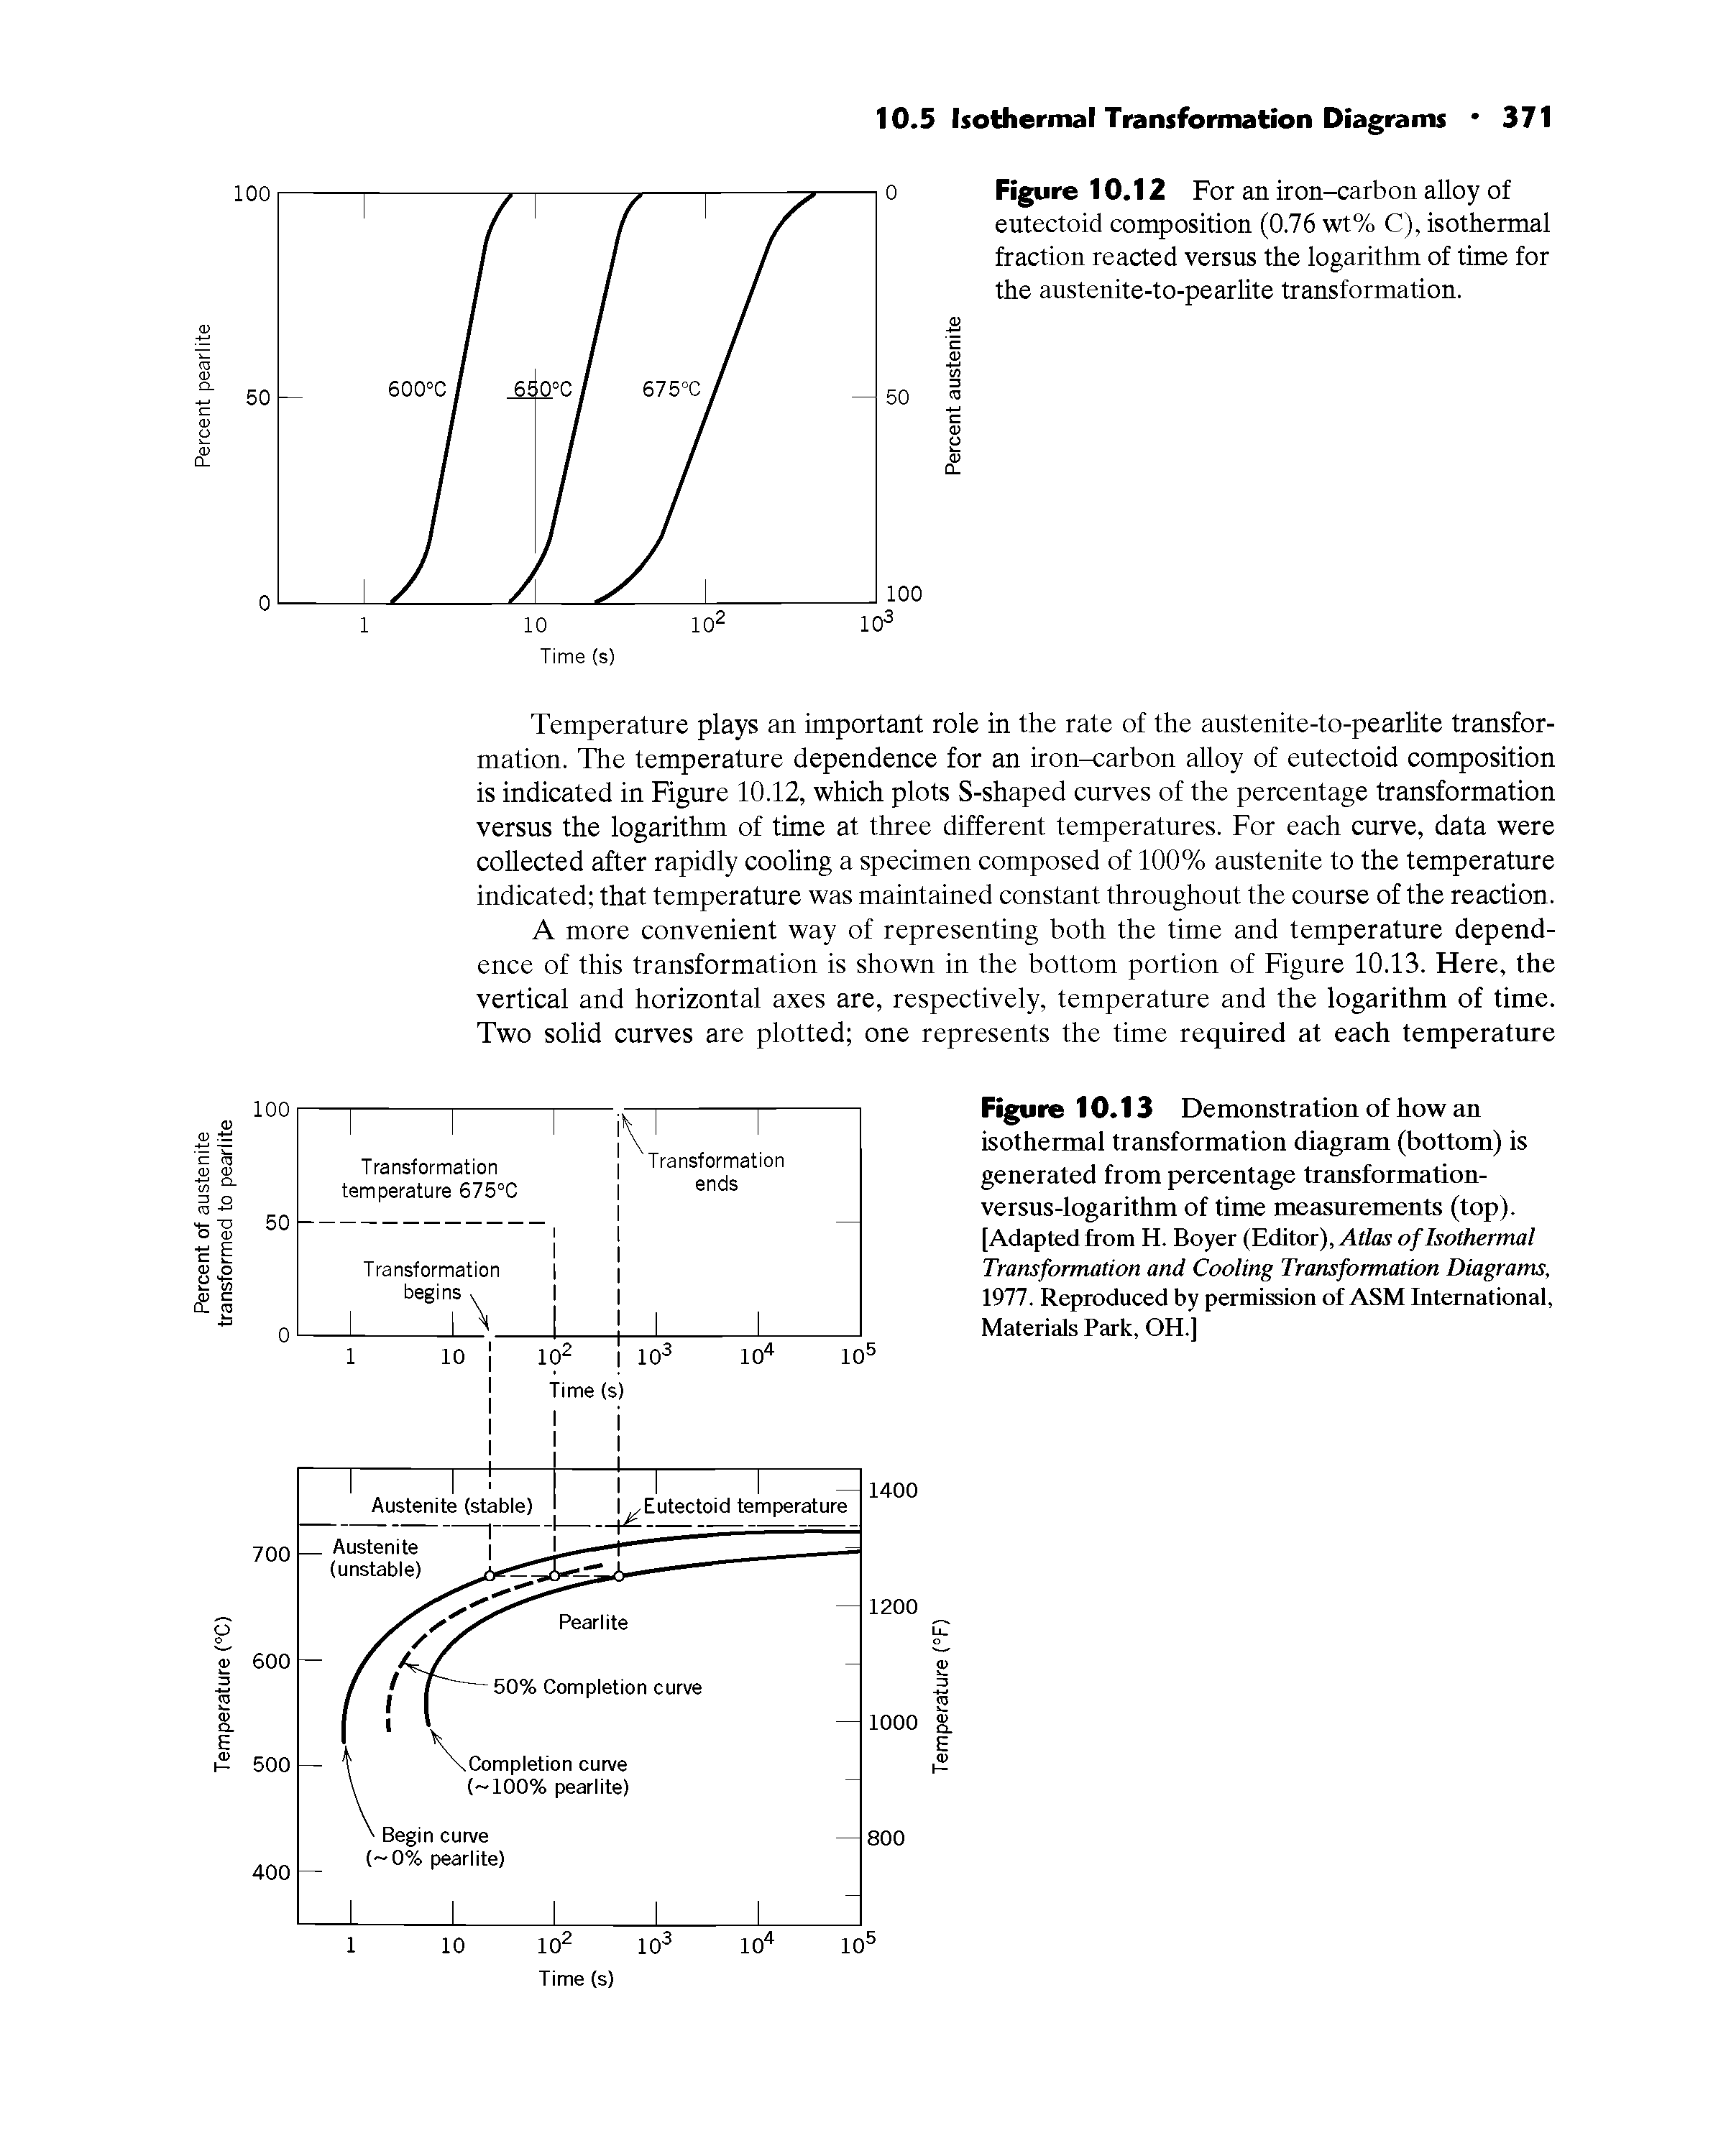 Figure 10.12 For an iron-carbon alloy of eutectoid composition (0.76 wt% C), isothermal fraction reacted versus the logarithm of time for the austenite-to-pearlite transformation.